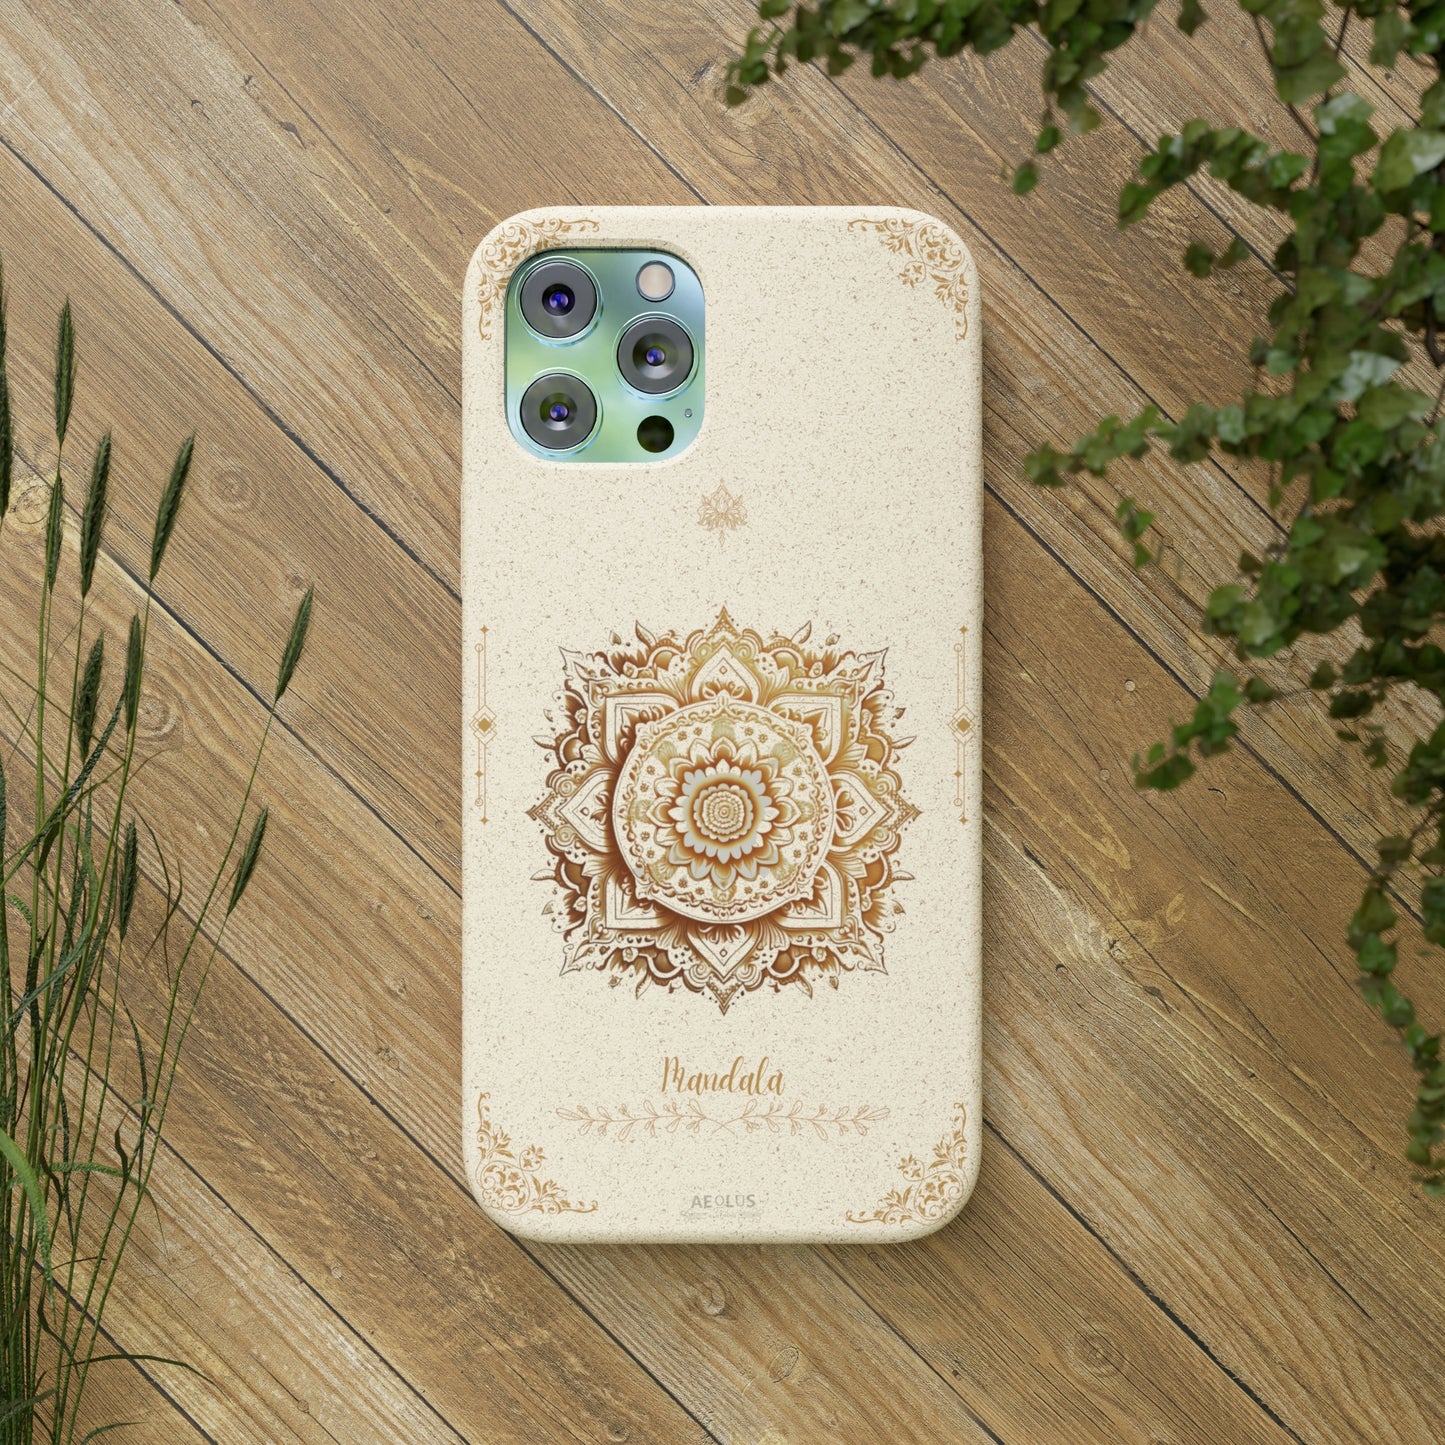 Biodegradable Cases - Mandalas in Bloom: Eco-Friendly Phone Cases Featuring Floral Designs